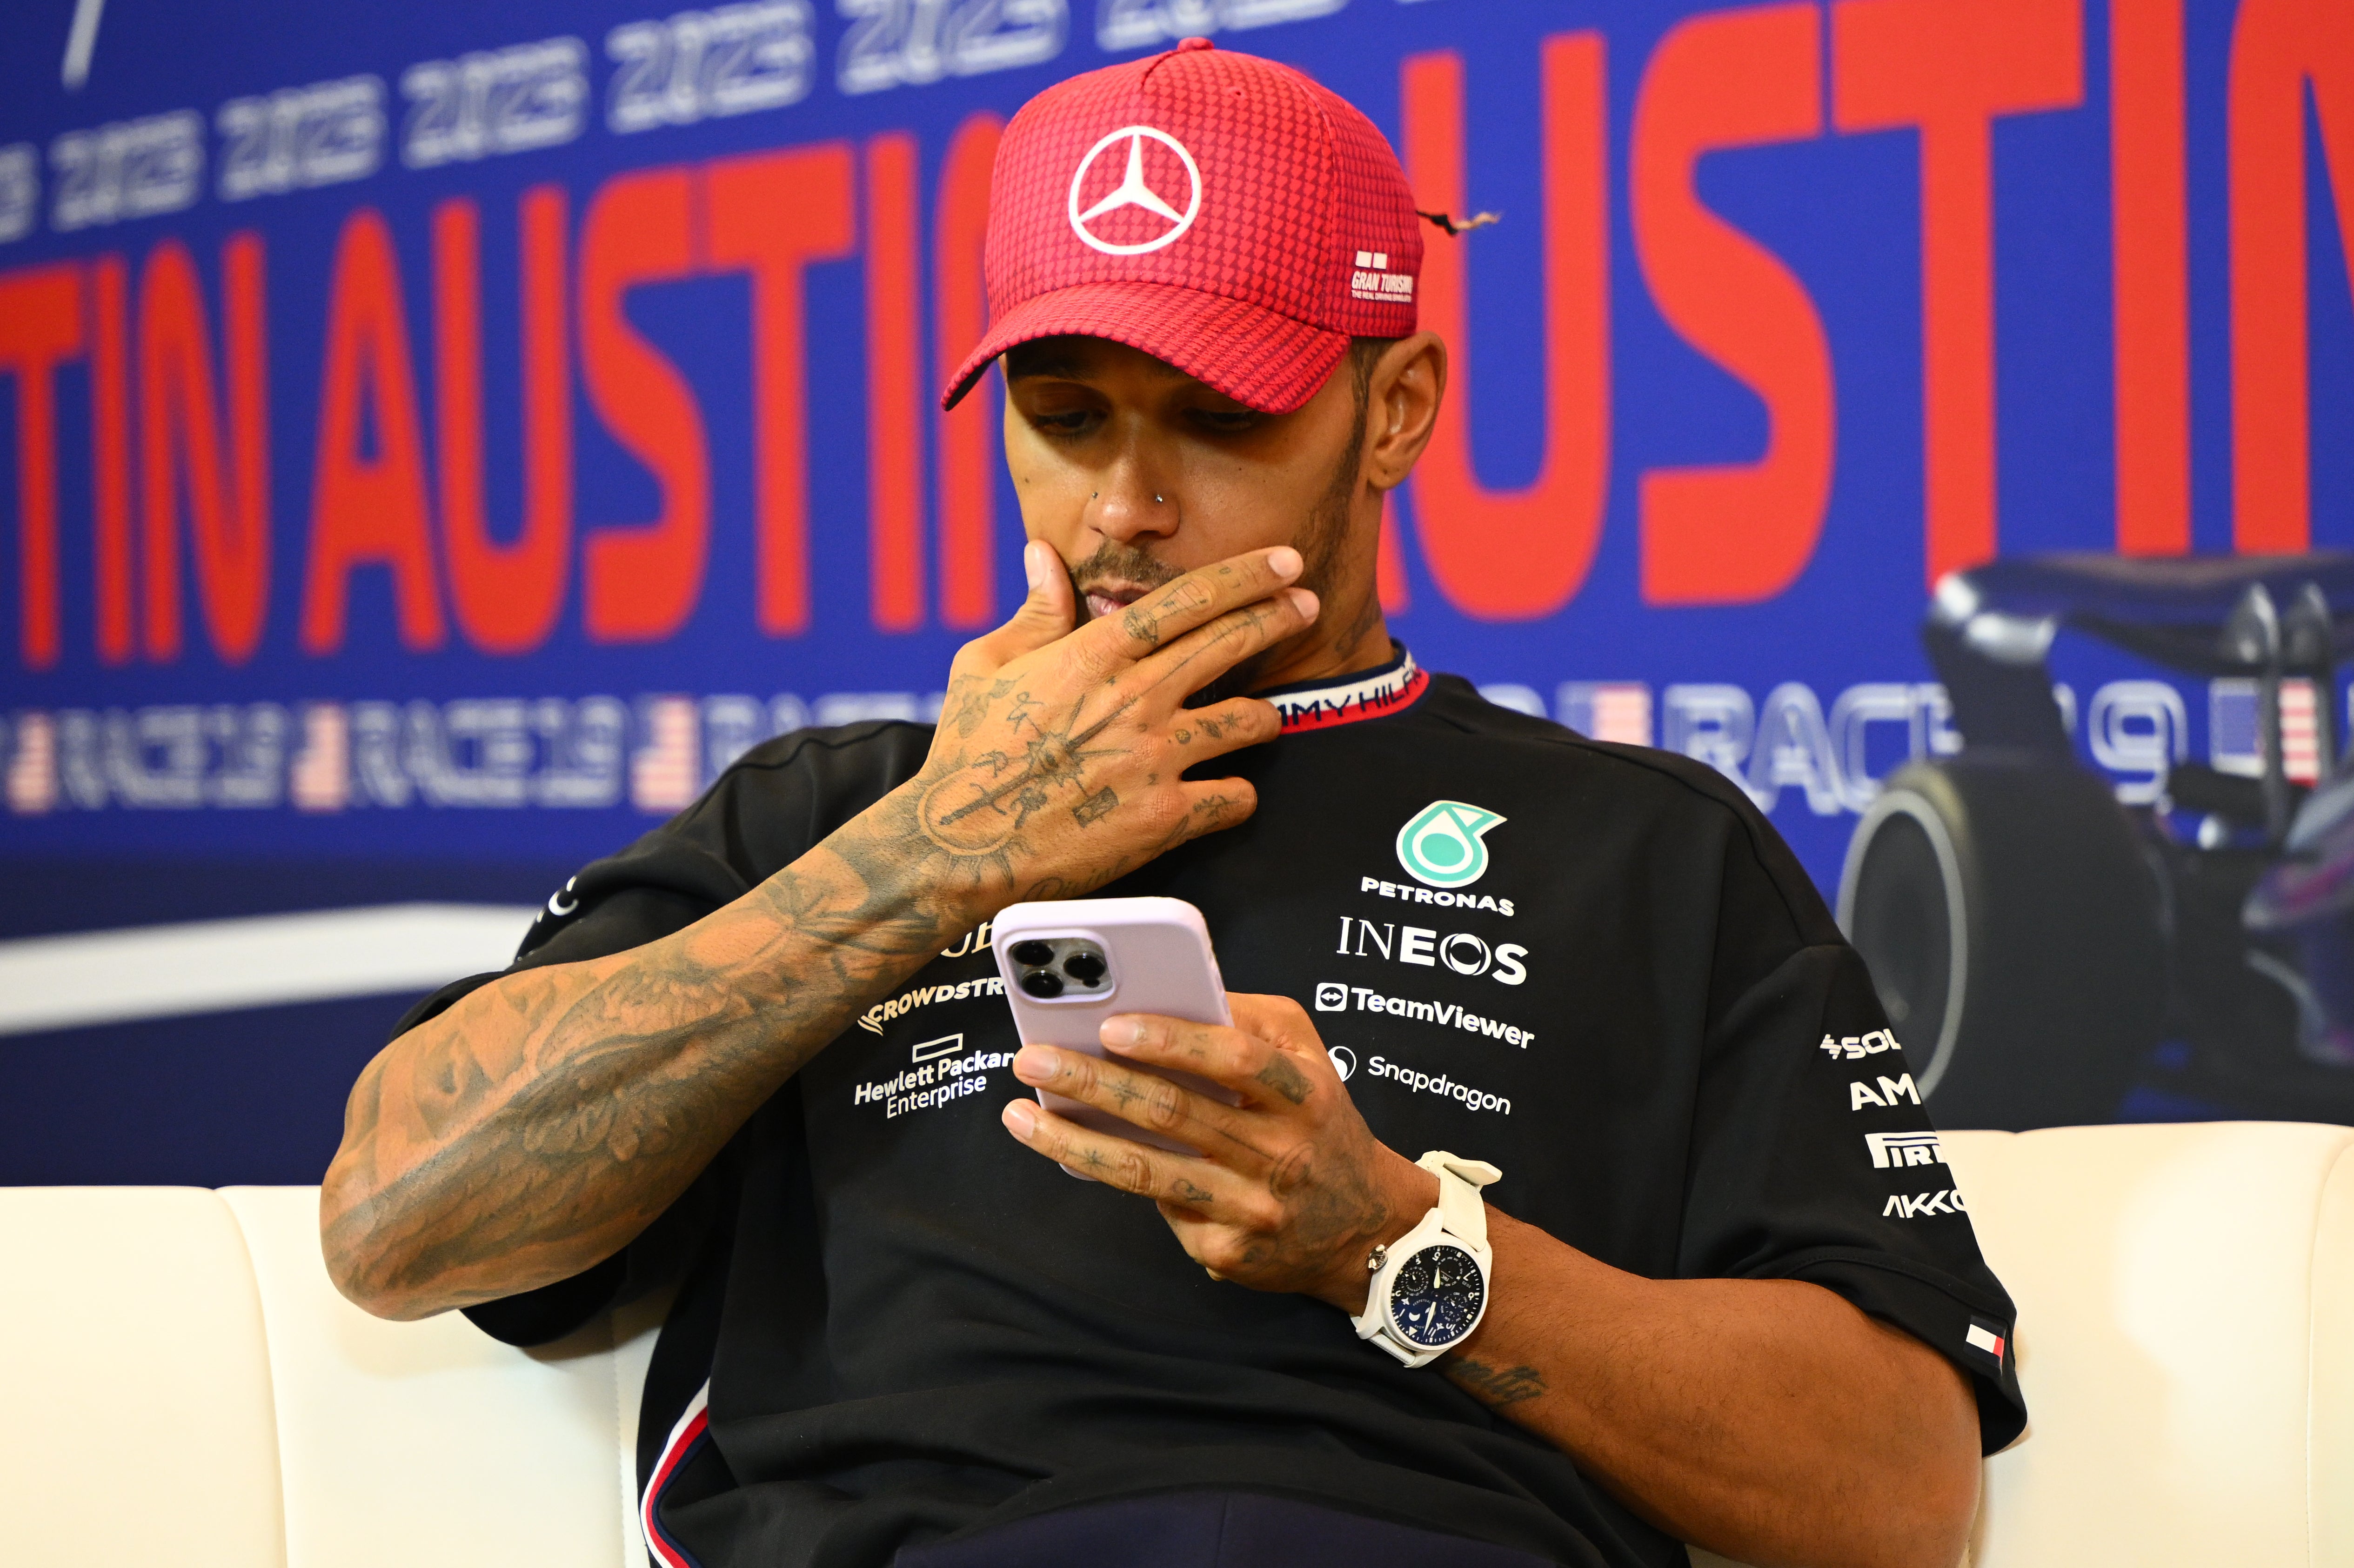 Lewis Hamilton was ‘disappointed’ after his disqualification from the US Grand Prix